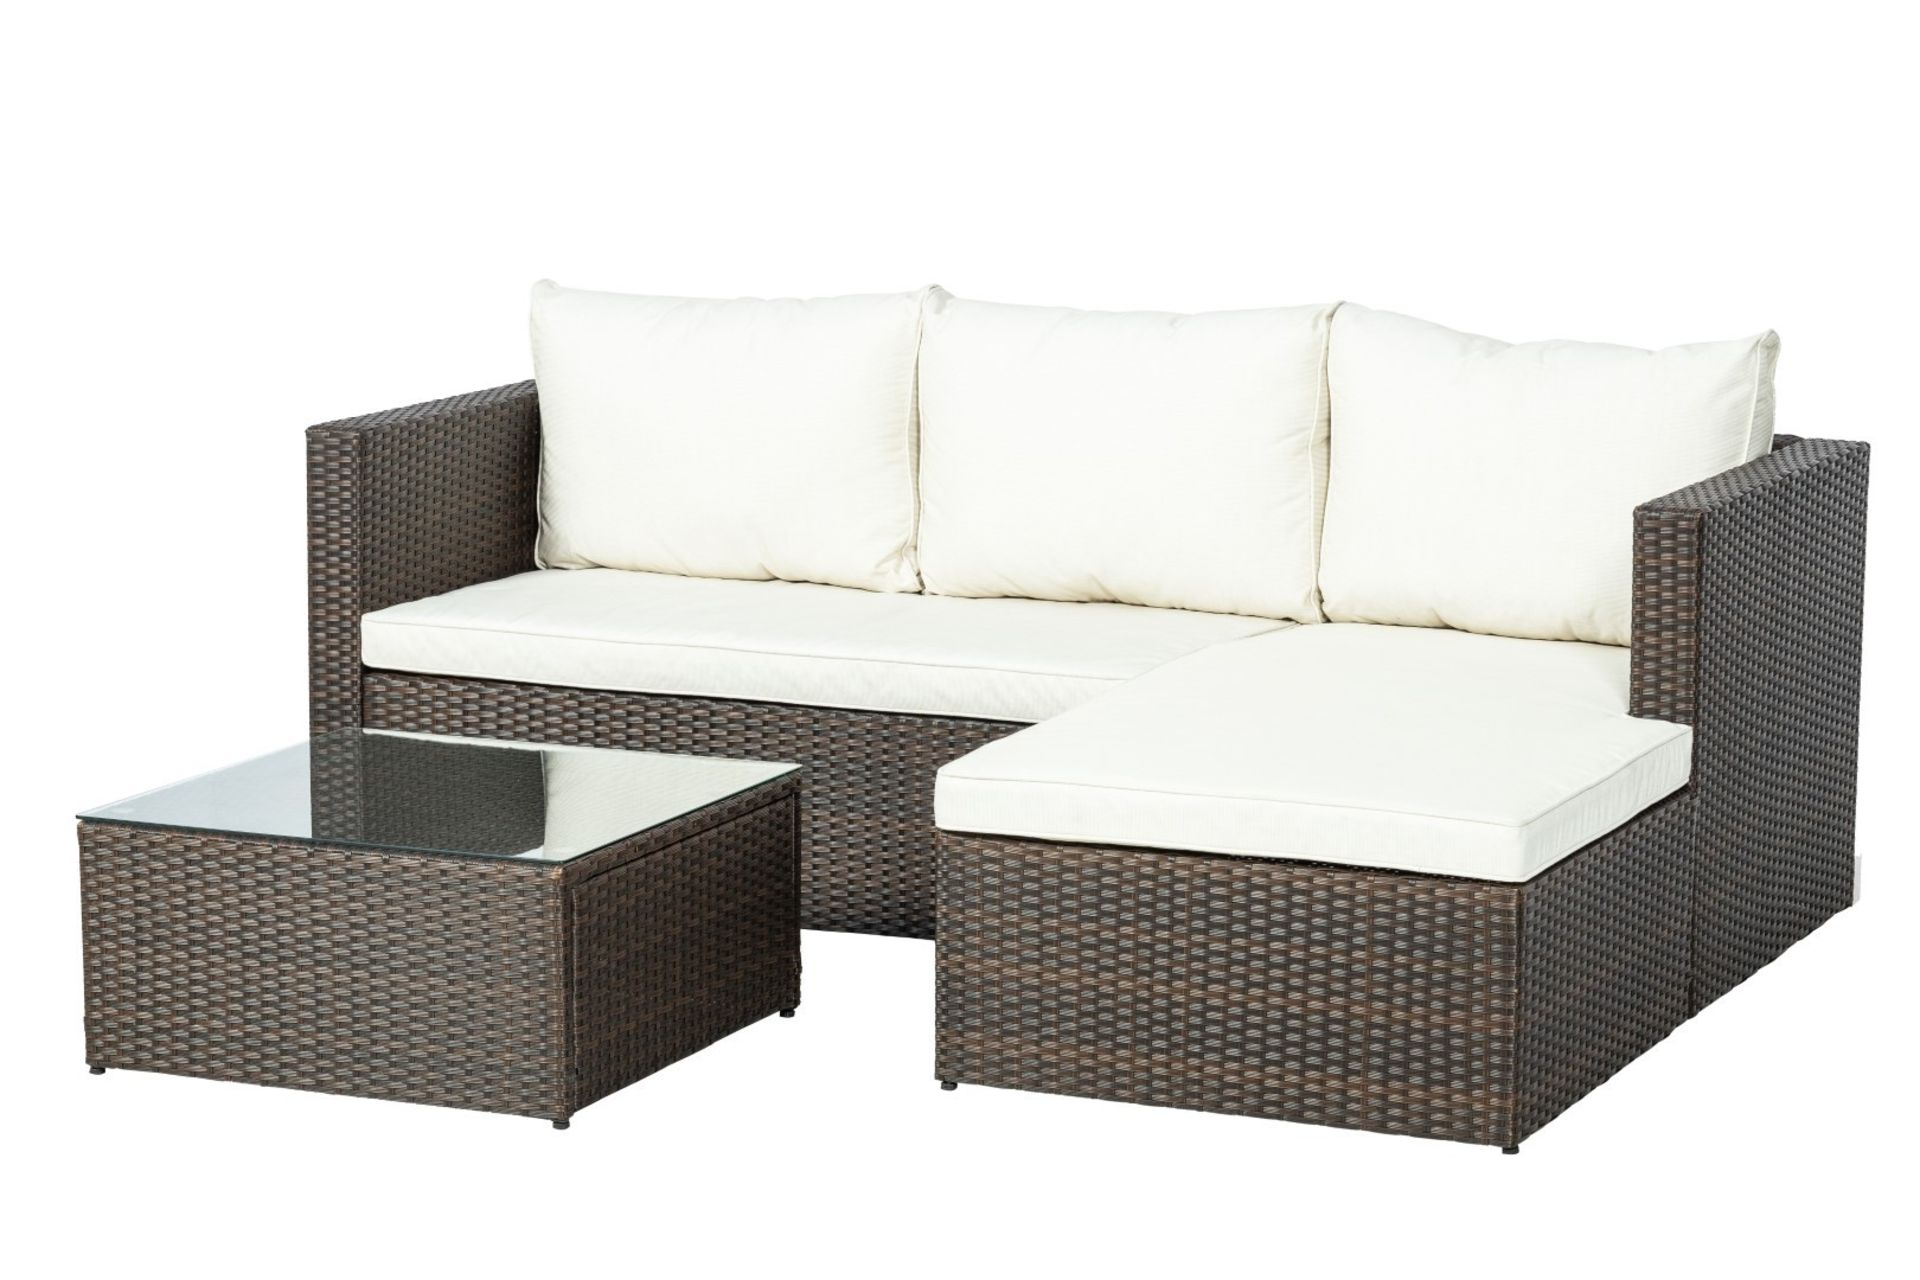 V Brand New Cannes KD Corner Set Includes Glass Topped Square Coffee Table ISP £429.00 (Dunelm)